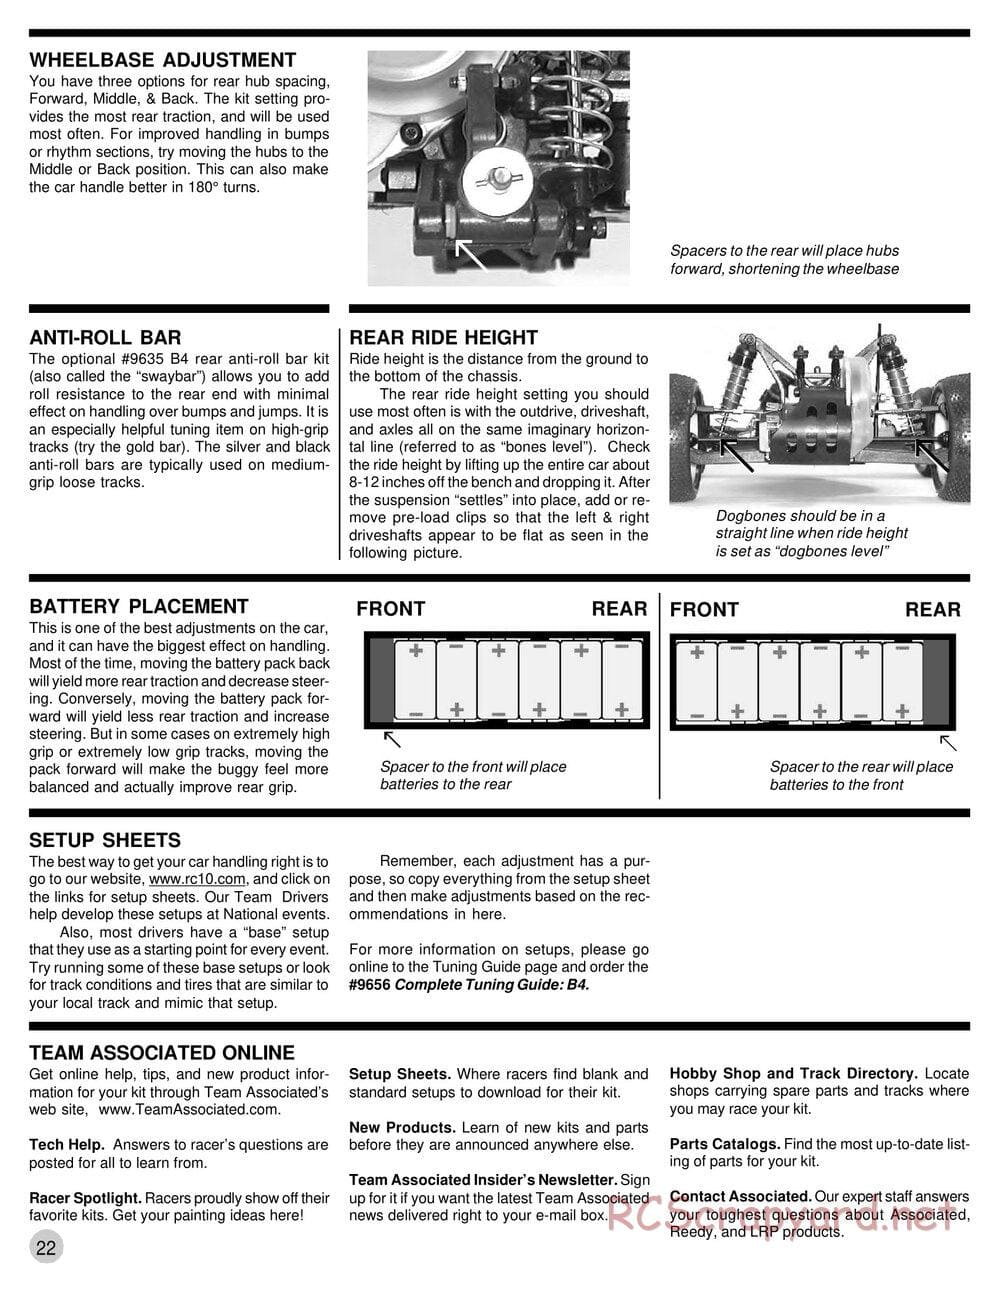 Team Associated - RC10 B4 RS - RTR - Manual - Page 20